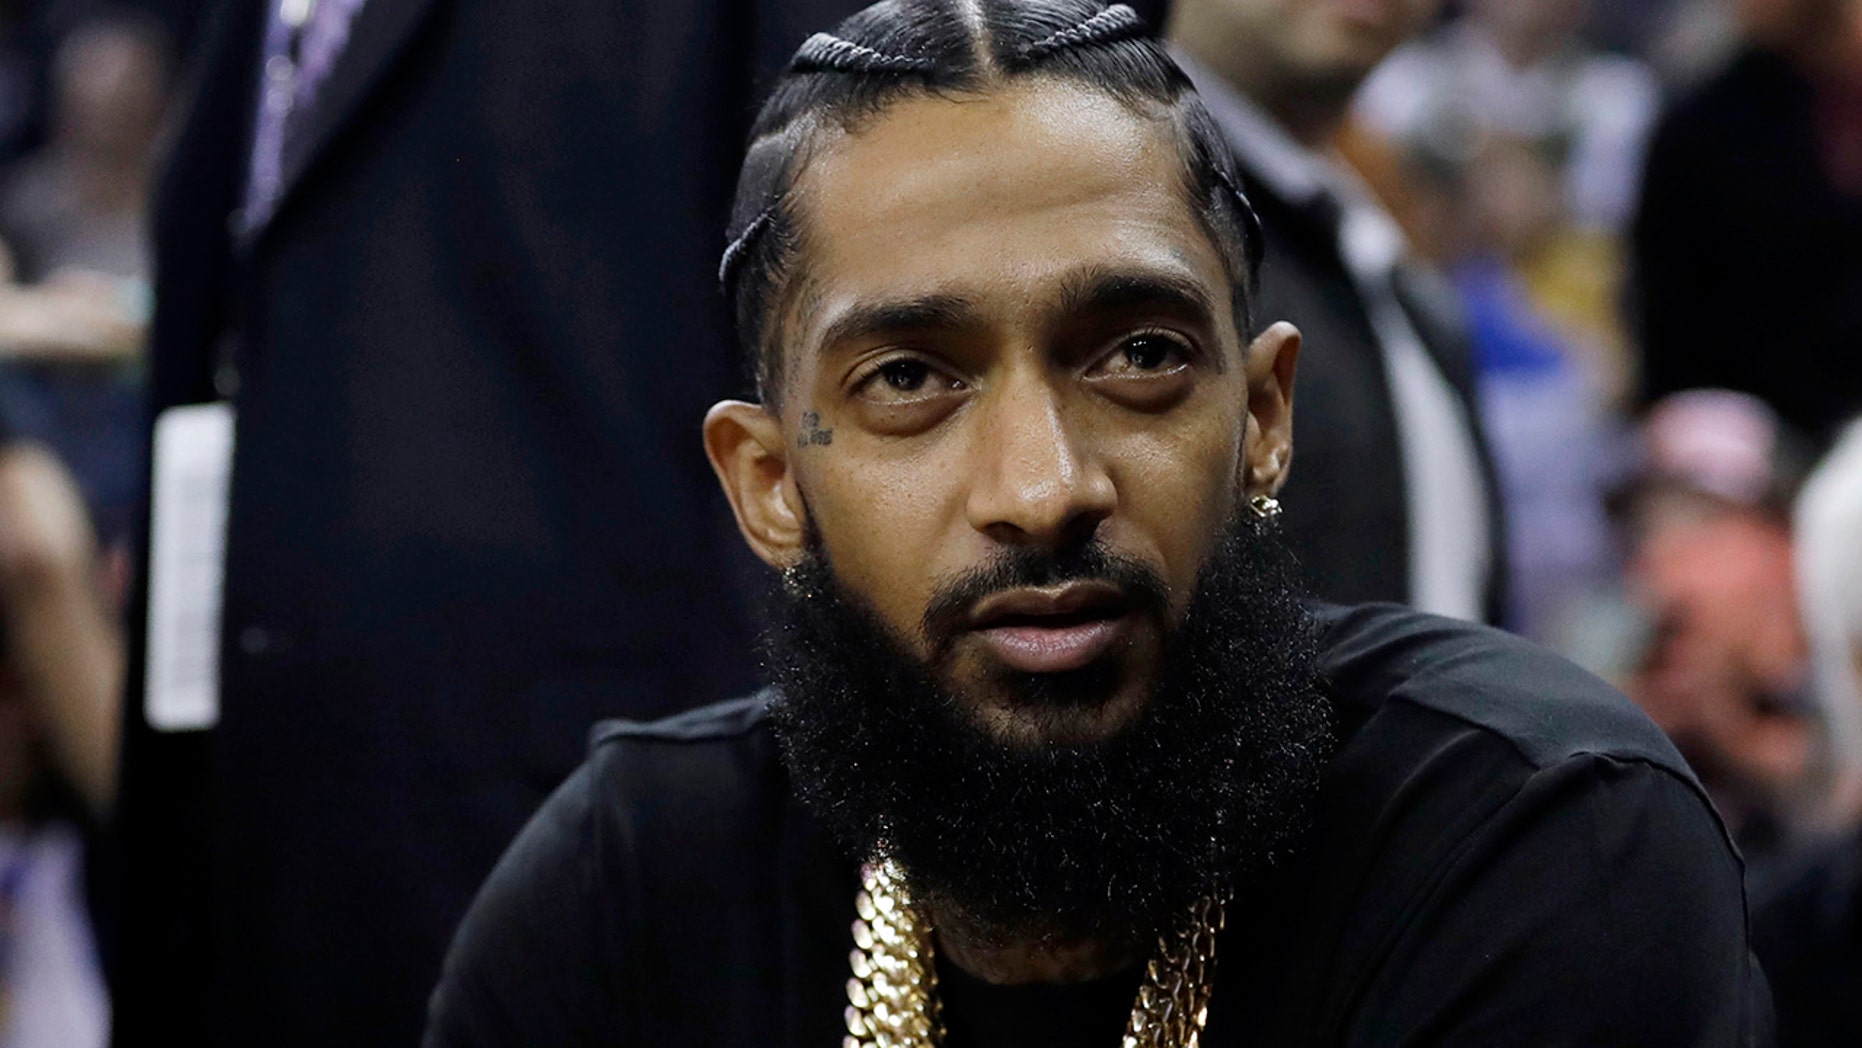 Nipsey Hussle died of gunshot wounds to the head and torso, coroner confirms | Fox News